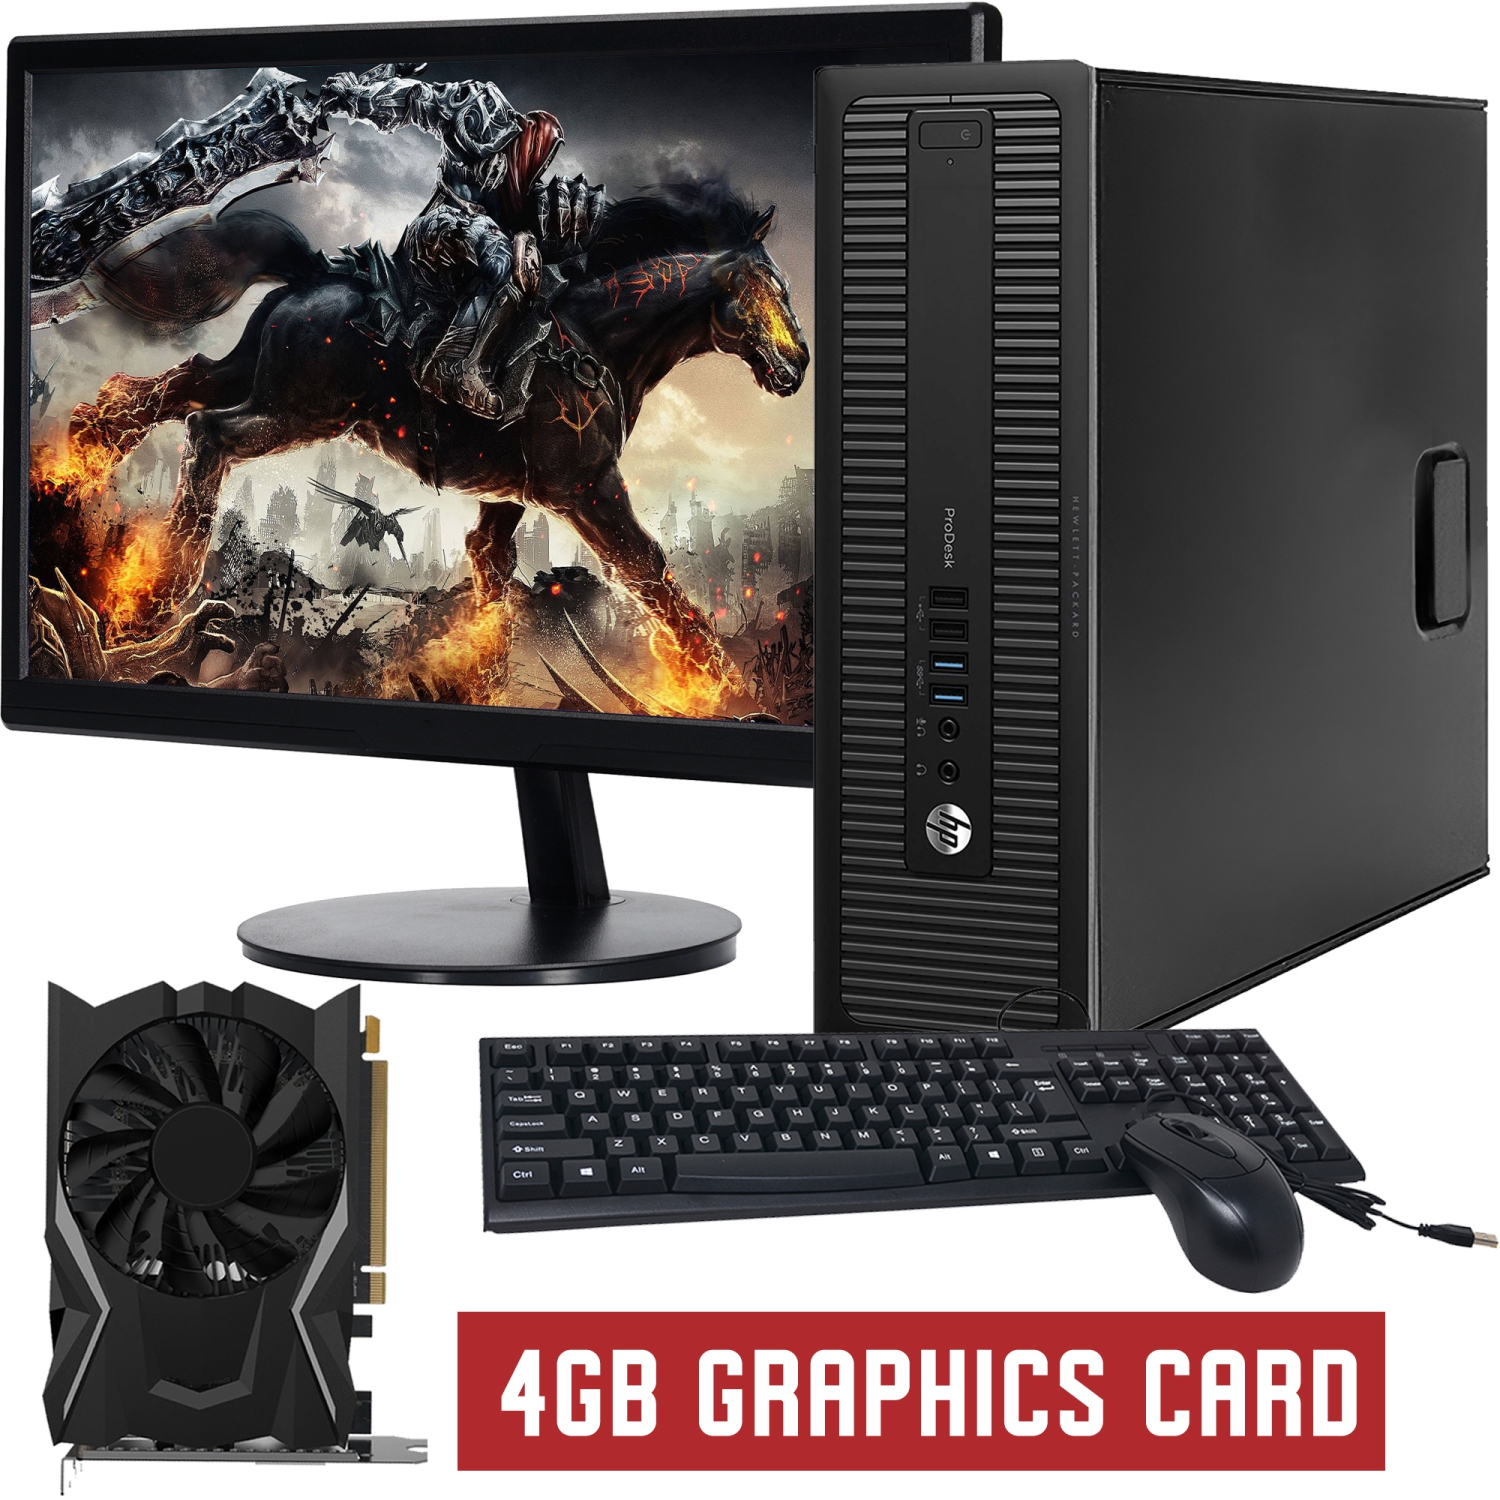 (Refurbished Good)-Gaming Computer with Monitor-HP computer,24 Inch,4GB Graphics Card, Intel Core i7@3.40GHz,1TB Storage 16GB Memory,New Keyboard & Mouse,Win 10 Pro,USB WiFi